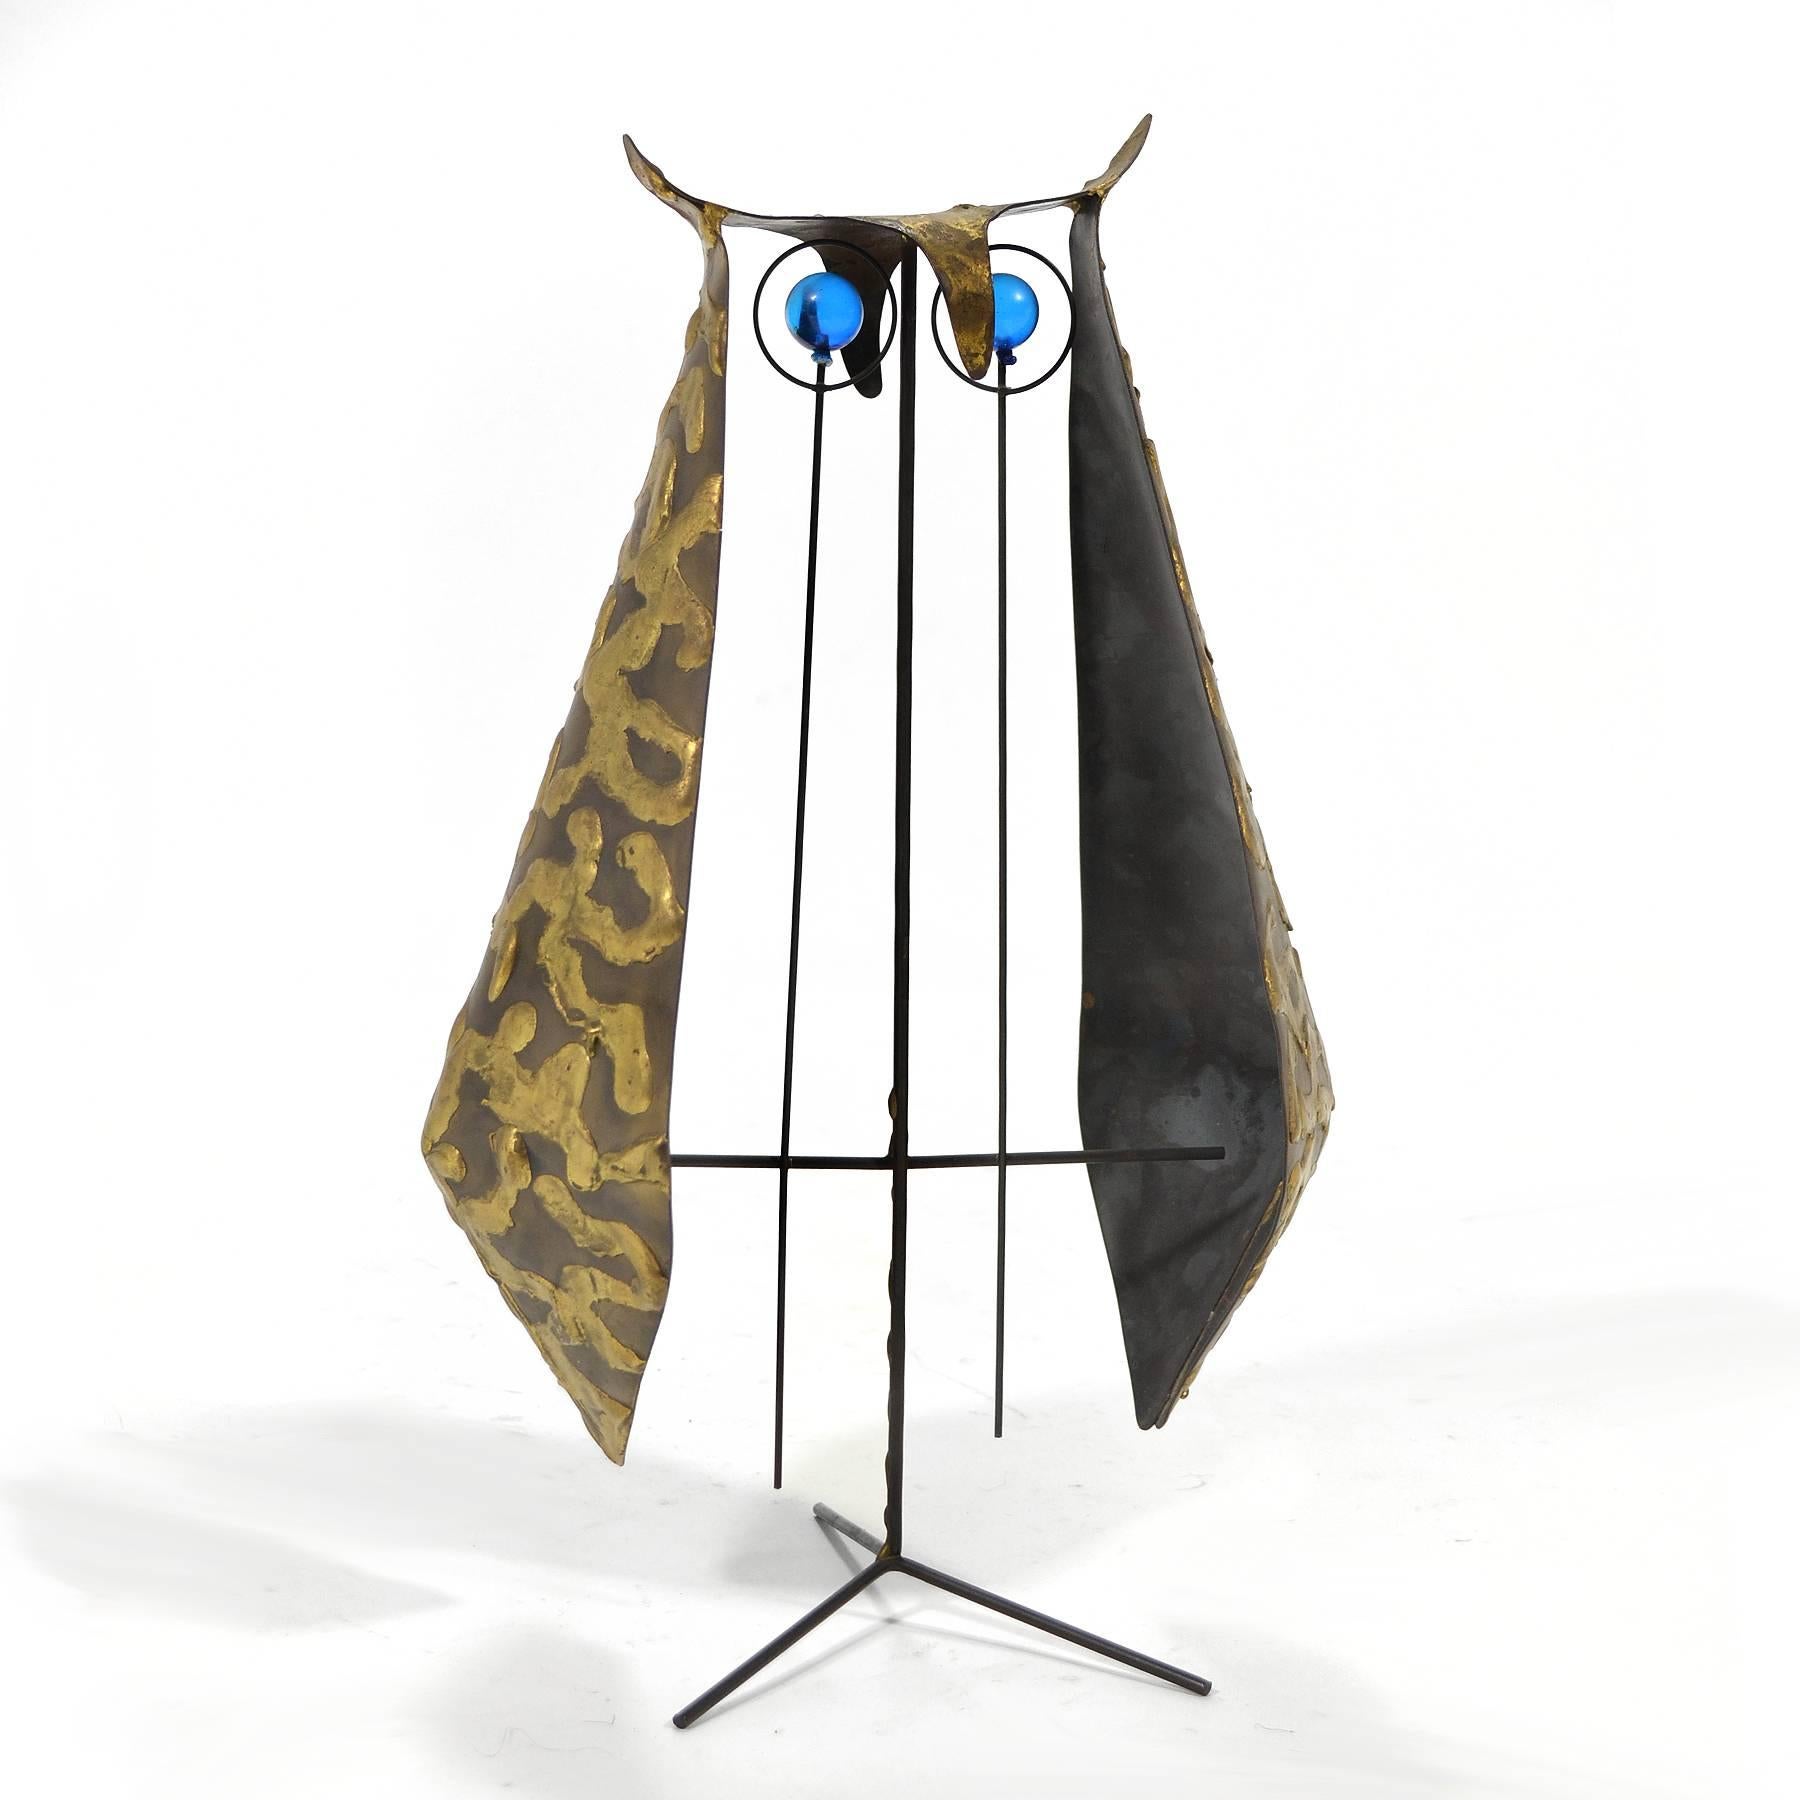 With an incredible economy of line, this delightful, whimsical sculpture by Cuban-American artist Ernesto Gonzalez-Jerez conveys not only the form of an owl, but a remarkable amount of personality.